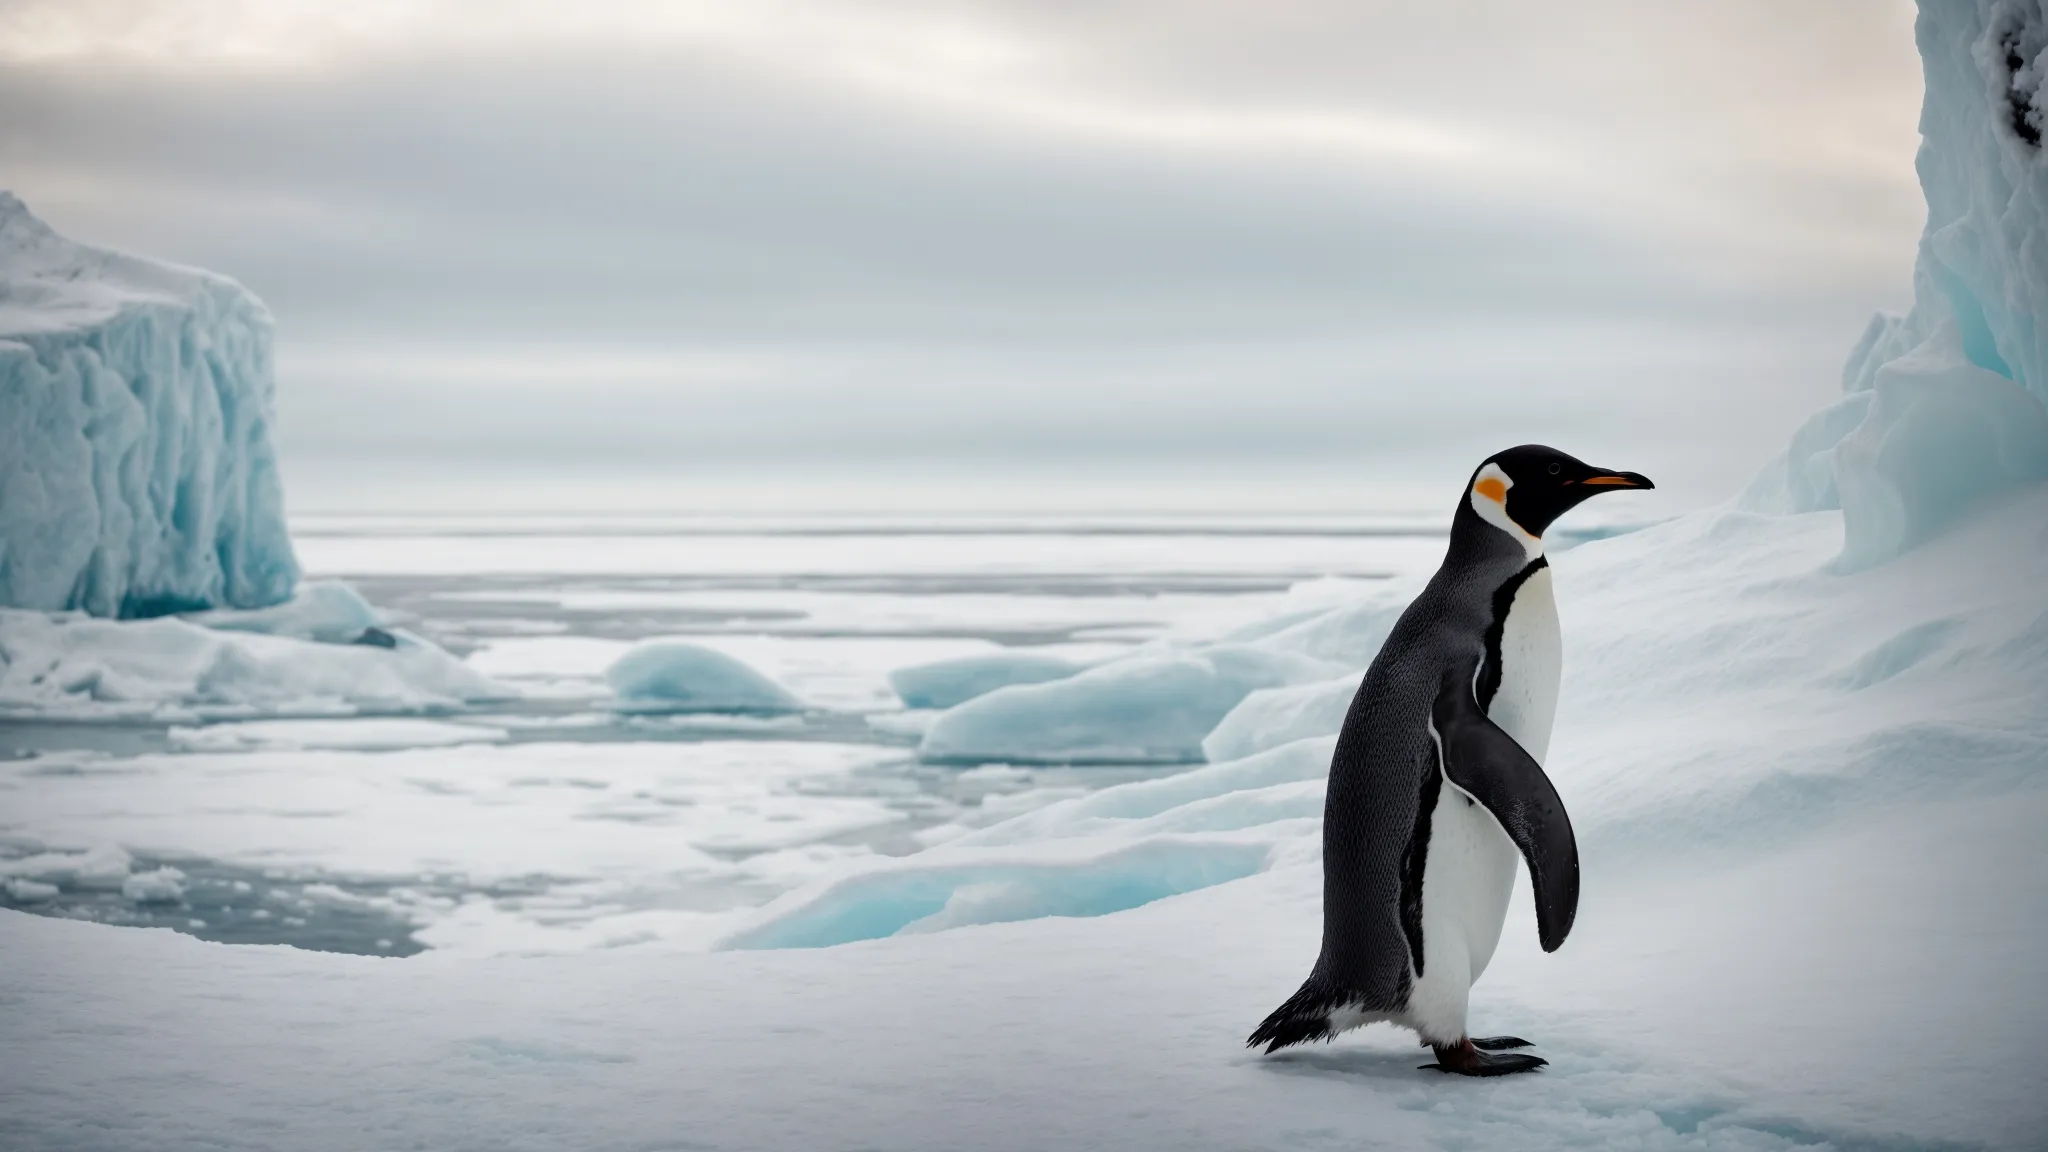 a penguin stands prominently on an icy landscape, surveying its territory.